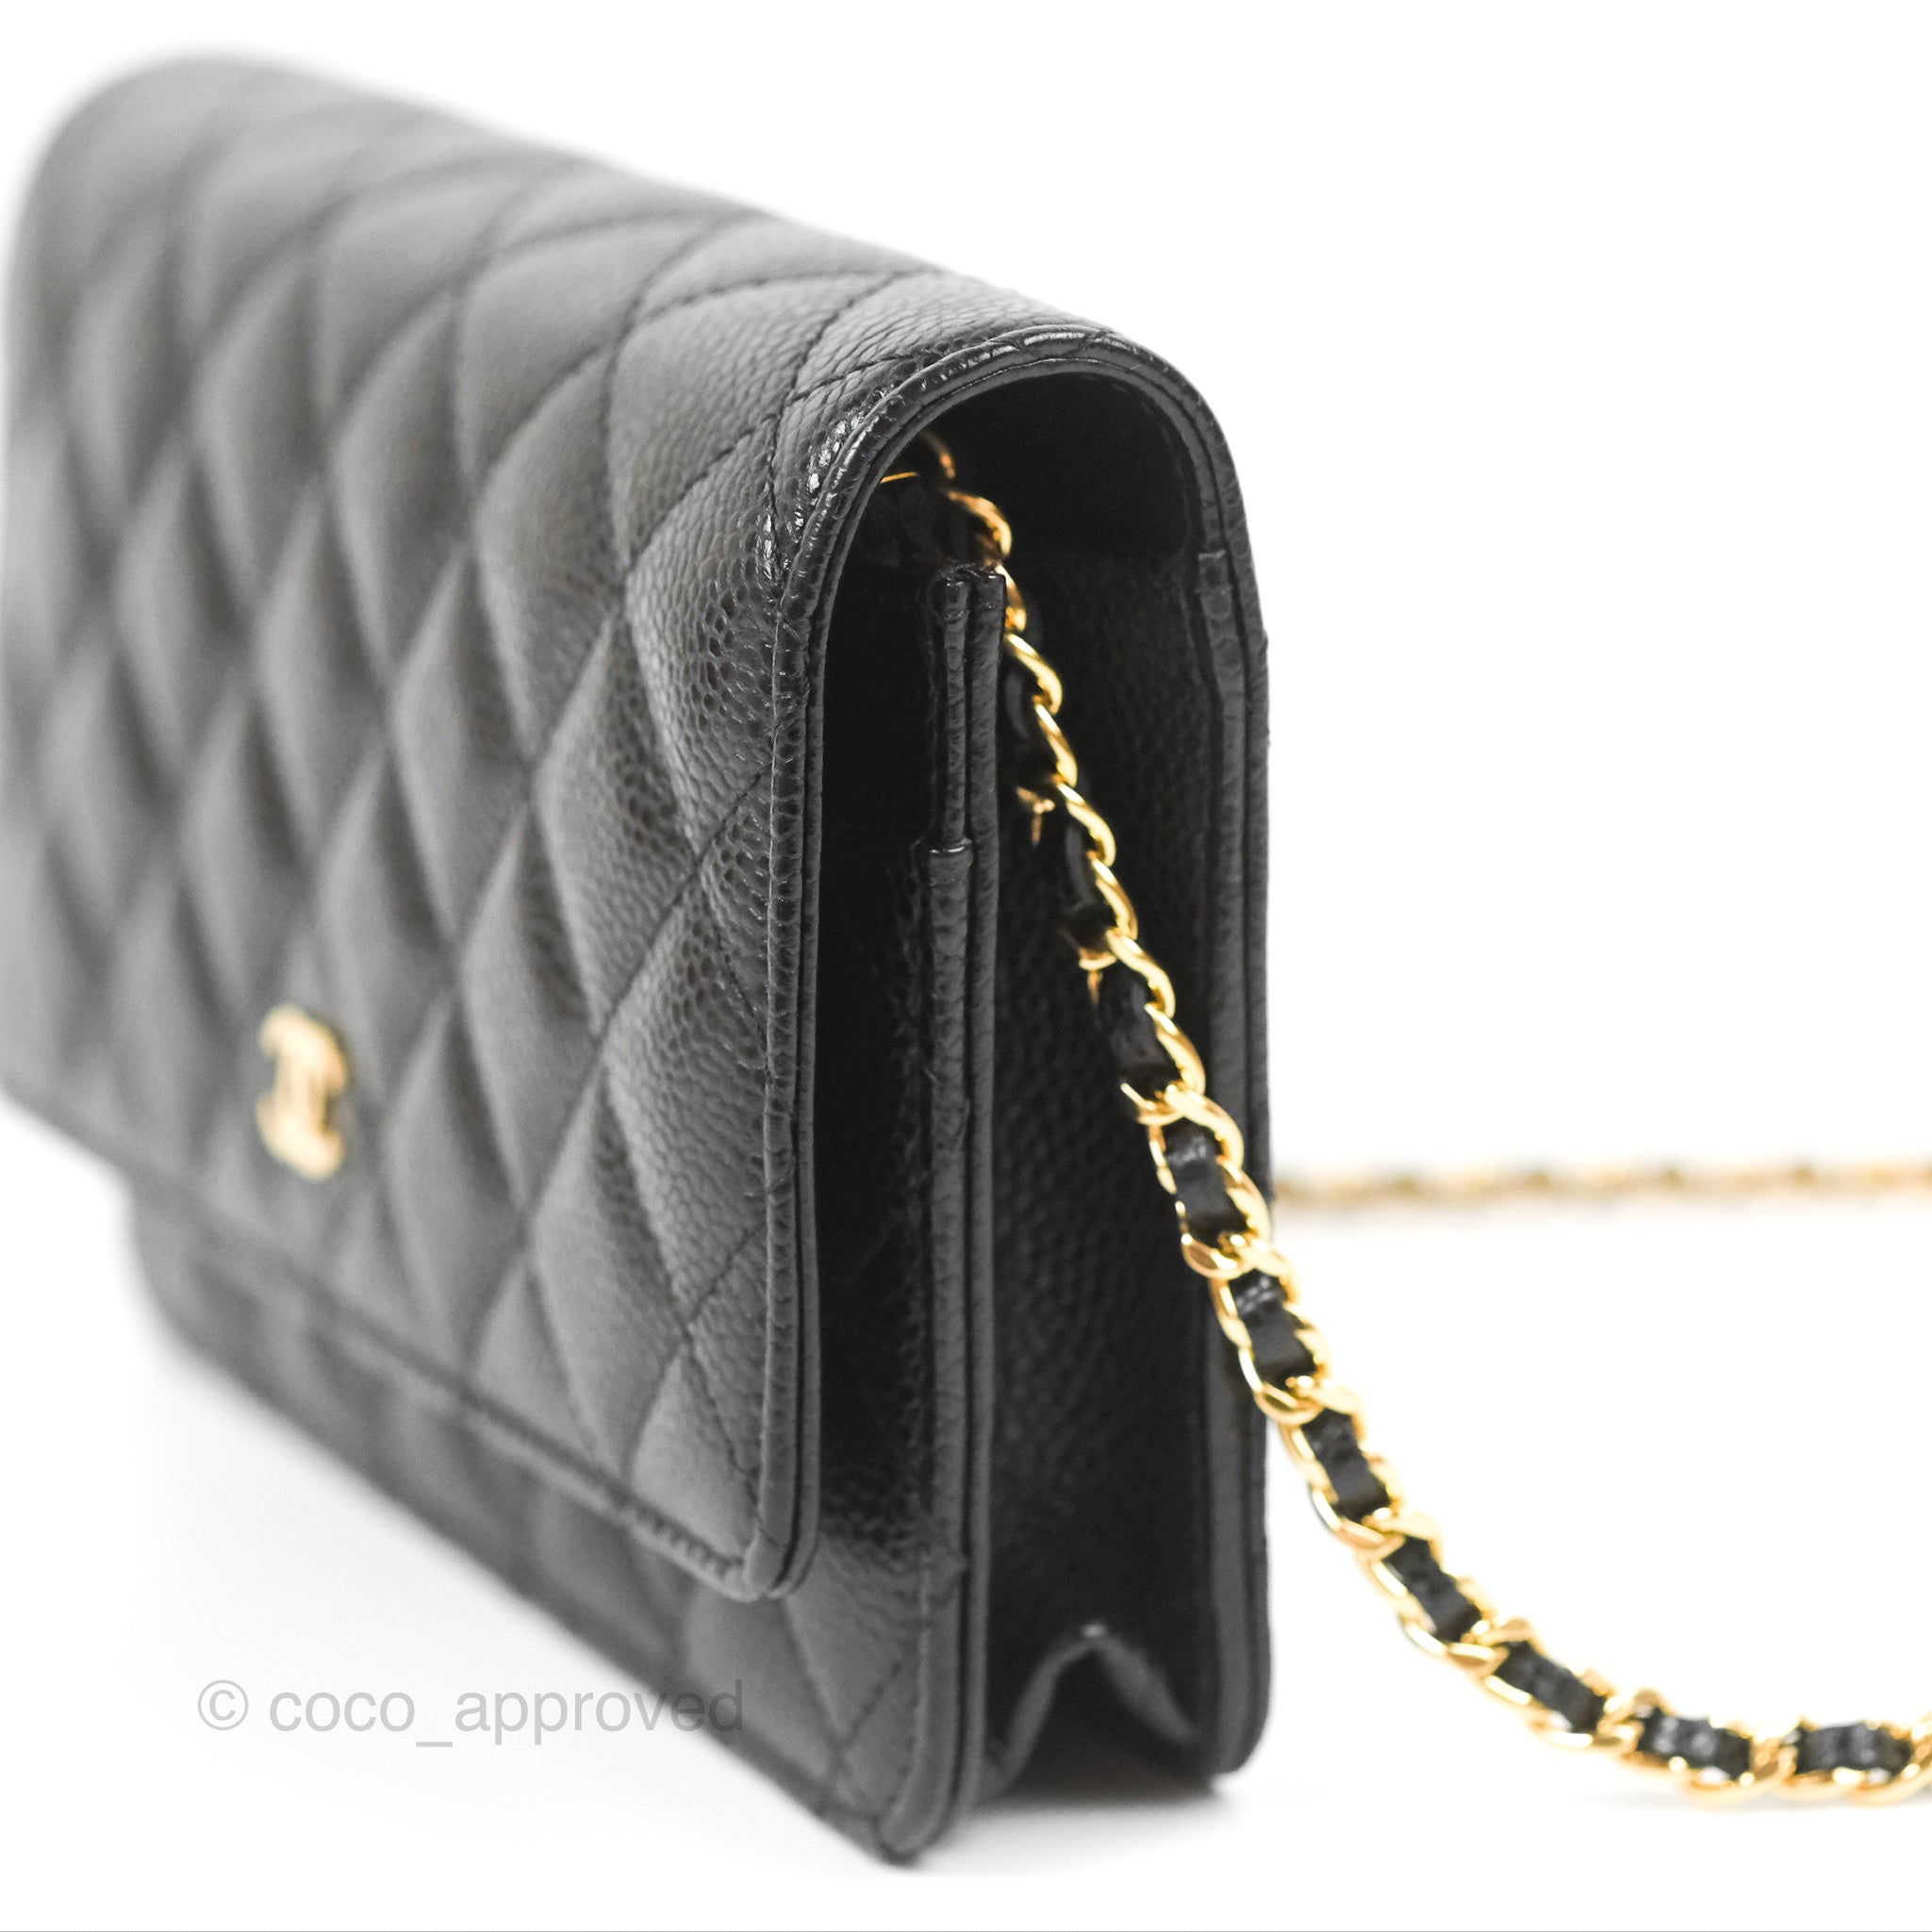 Chanel Classic WOC Wallet on Chain in Black Caviar with Gold Hardware - SOLD